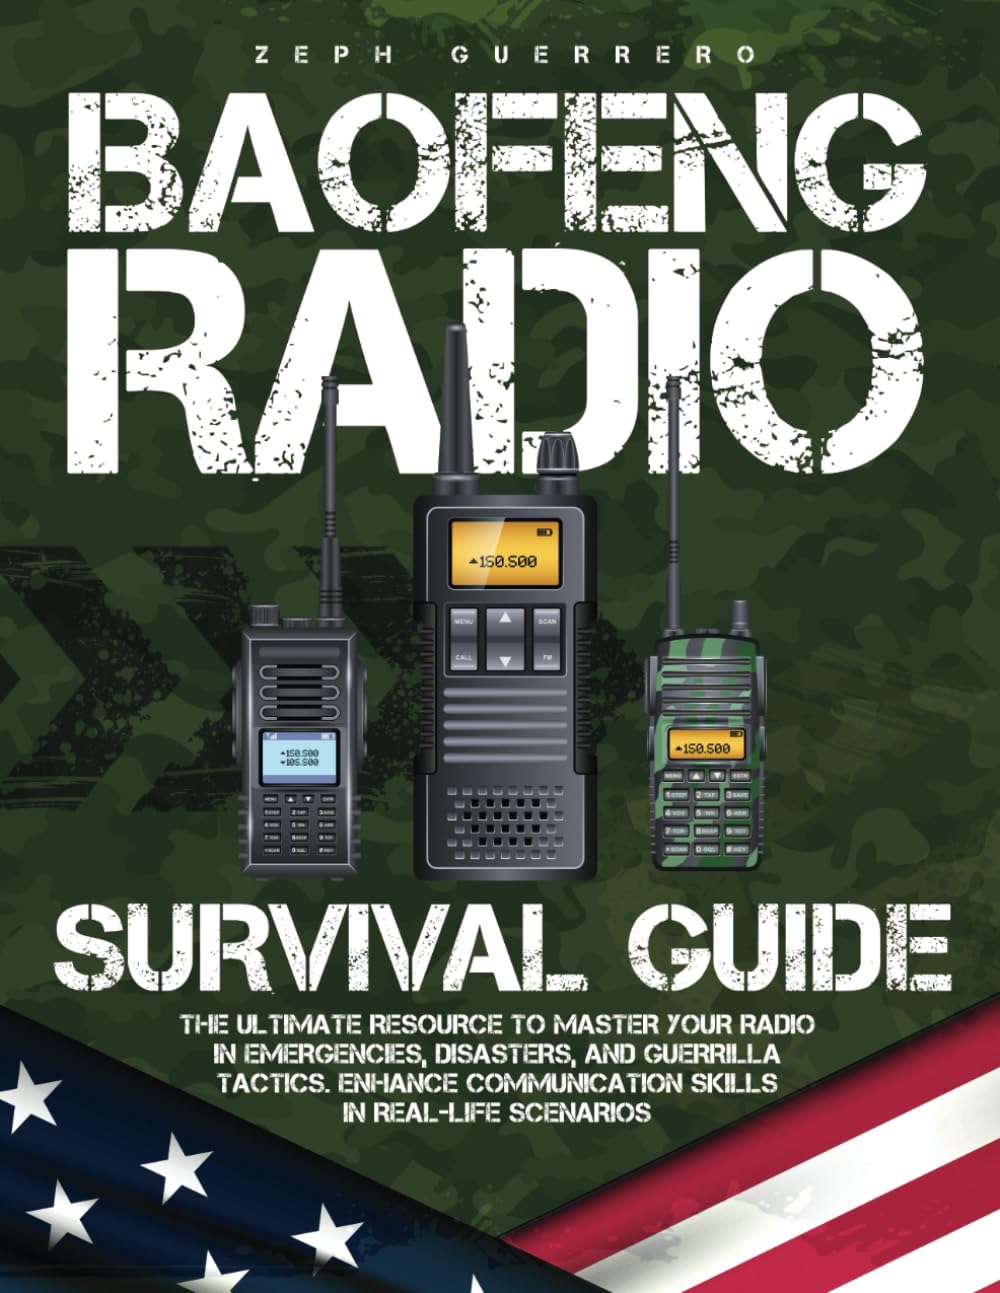 The Baofeng Radio Survival Guide: The Ultimate Resource to Master Your Radio in Emergencies, Disasters, and Guerrilla Tactics & Enhance Communication Skills in Real-Life Scenarios